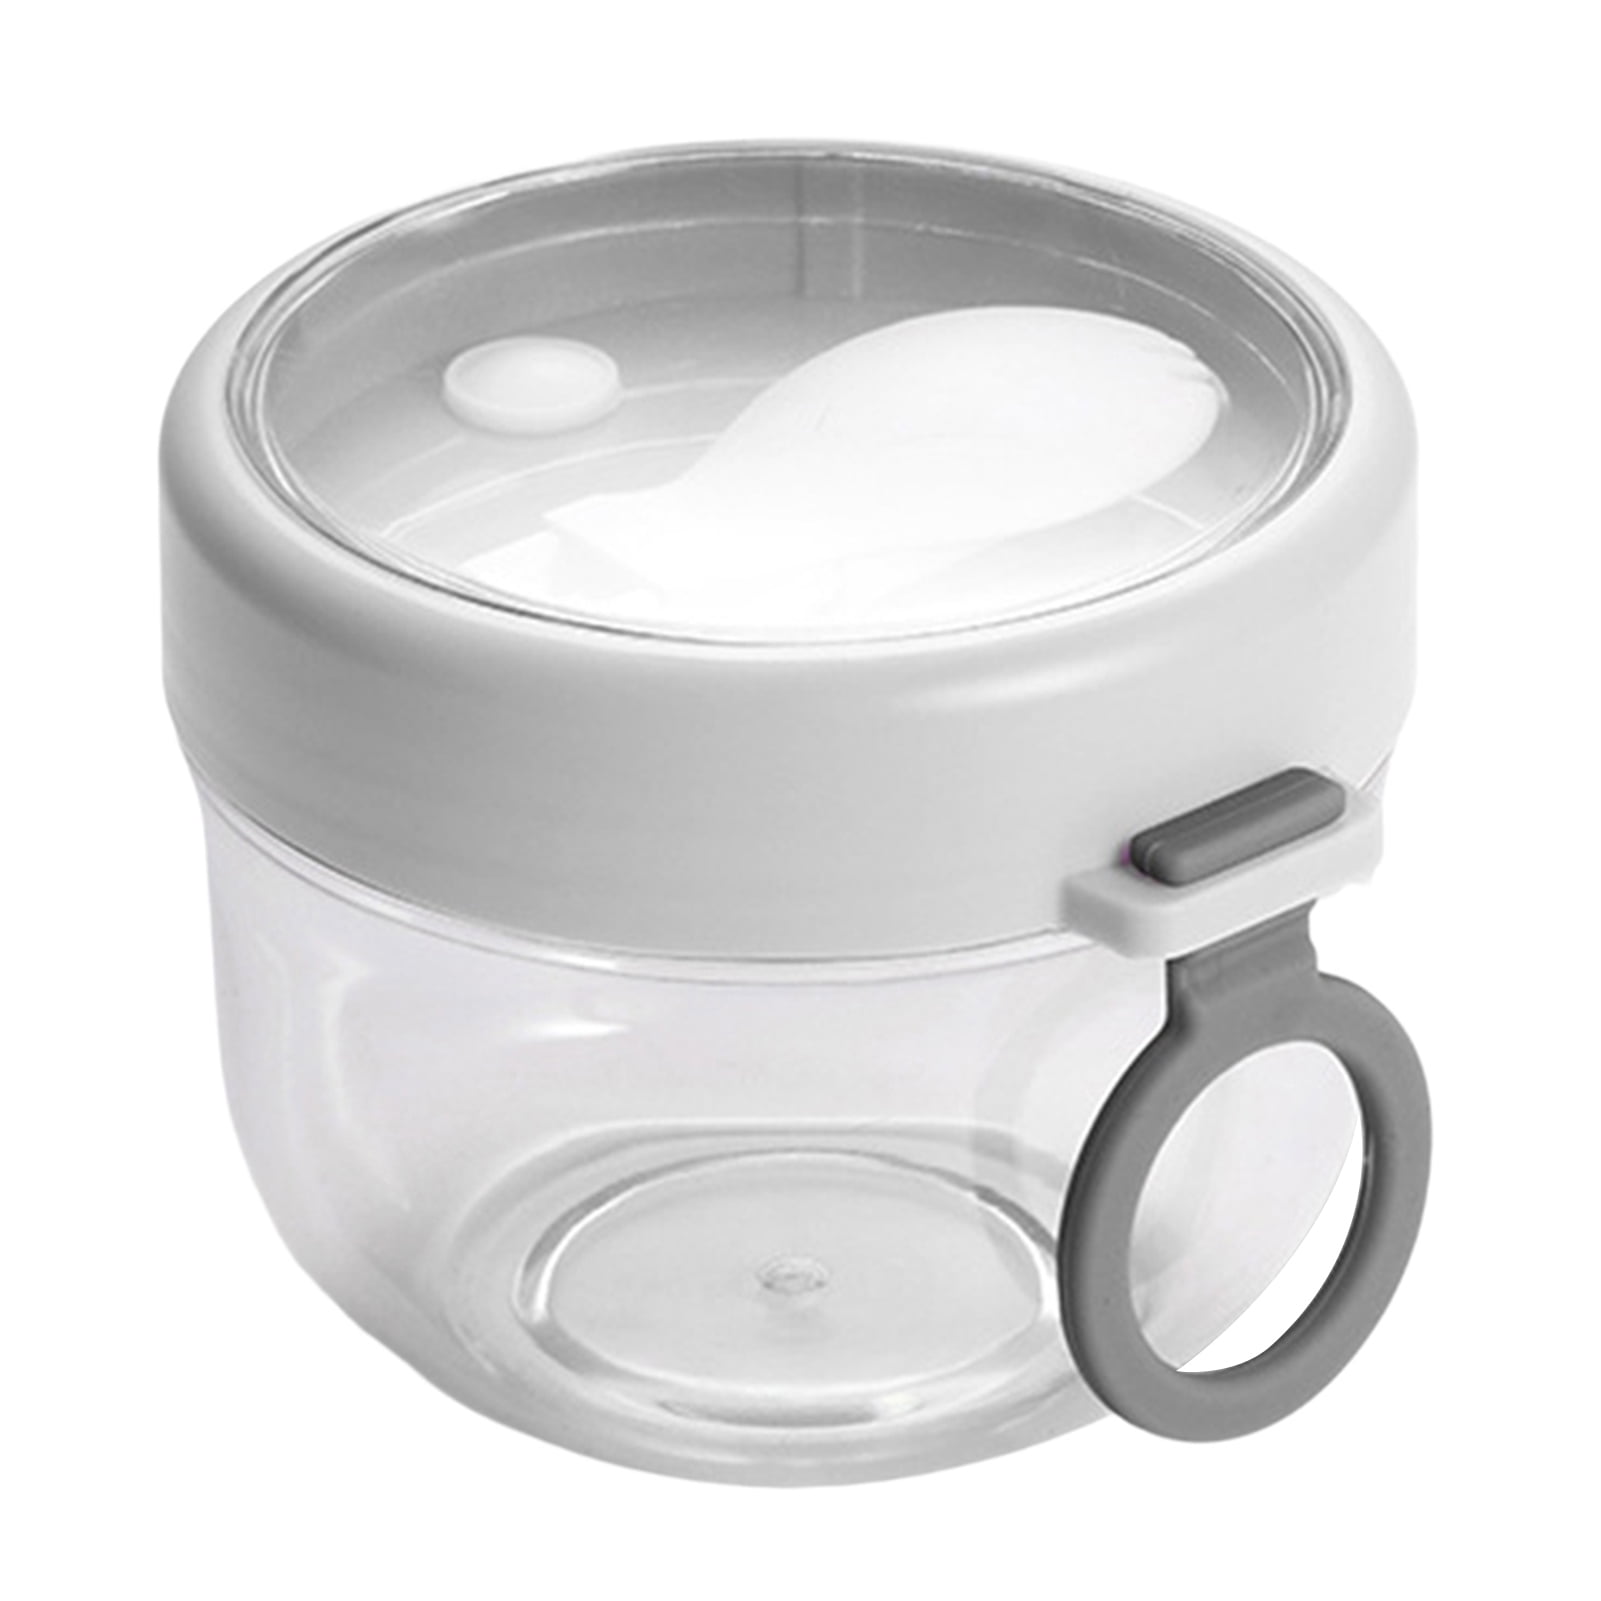  Homotte Leakproof Dips Containers Compatible with Most